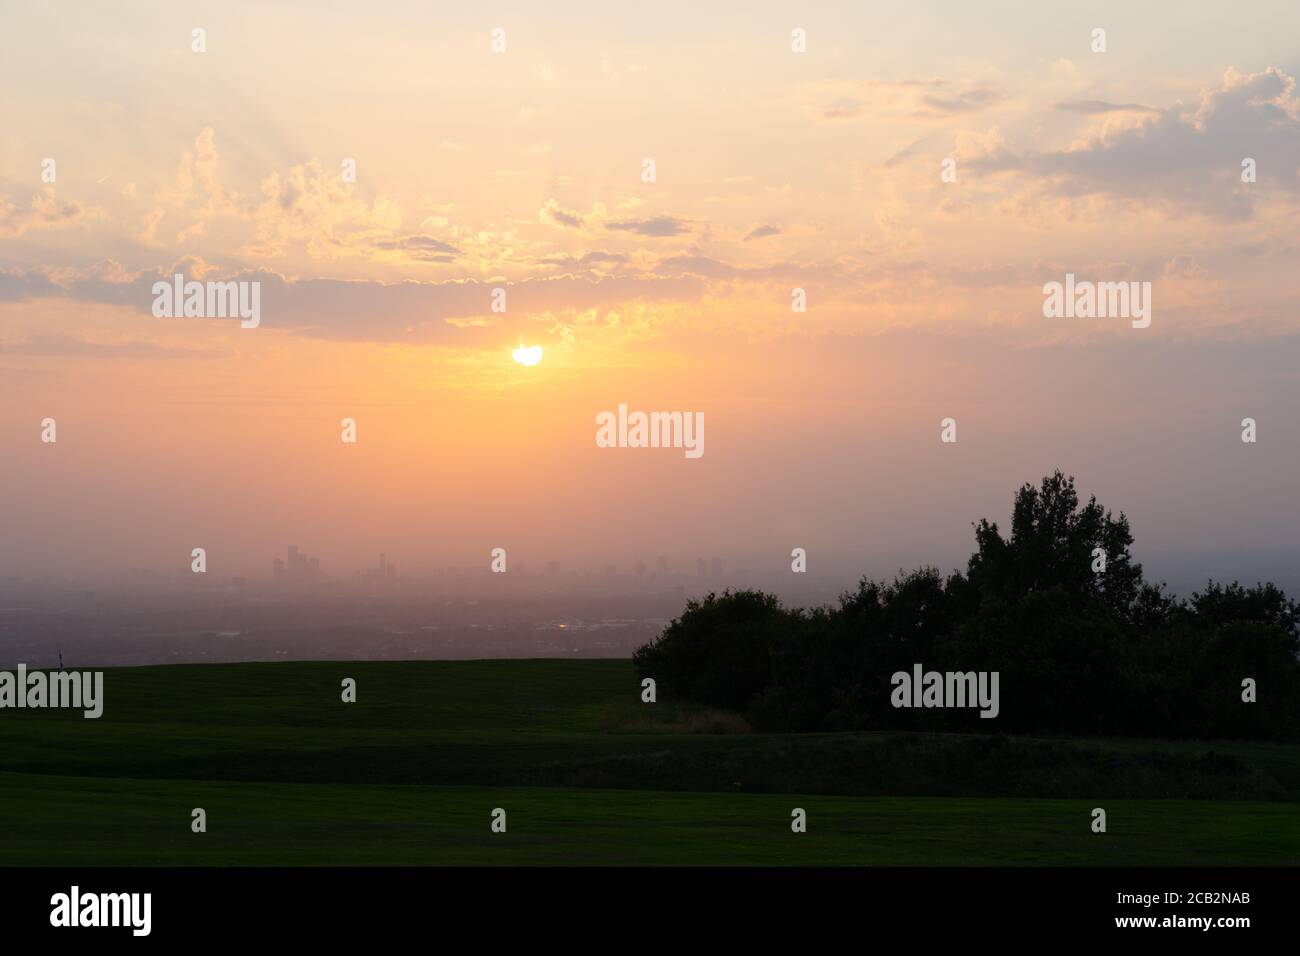 Sunset over Manchester city from Werneth Low golf course. The poor air visibility and clouds helped produce a spectacular deep orange red sunset. UK Stock Photo